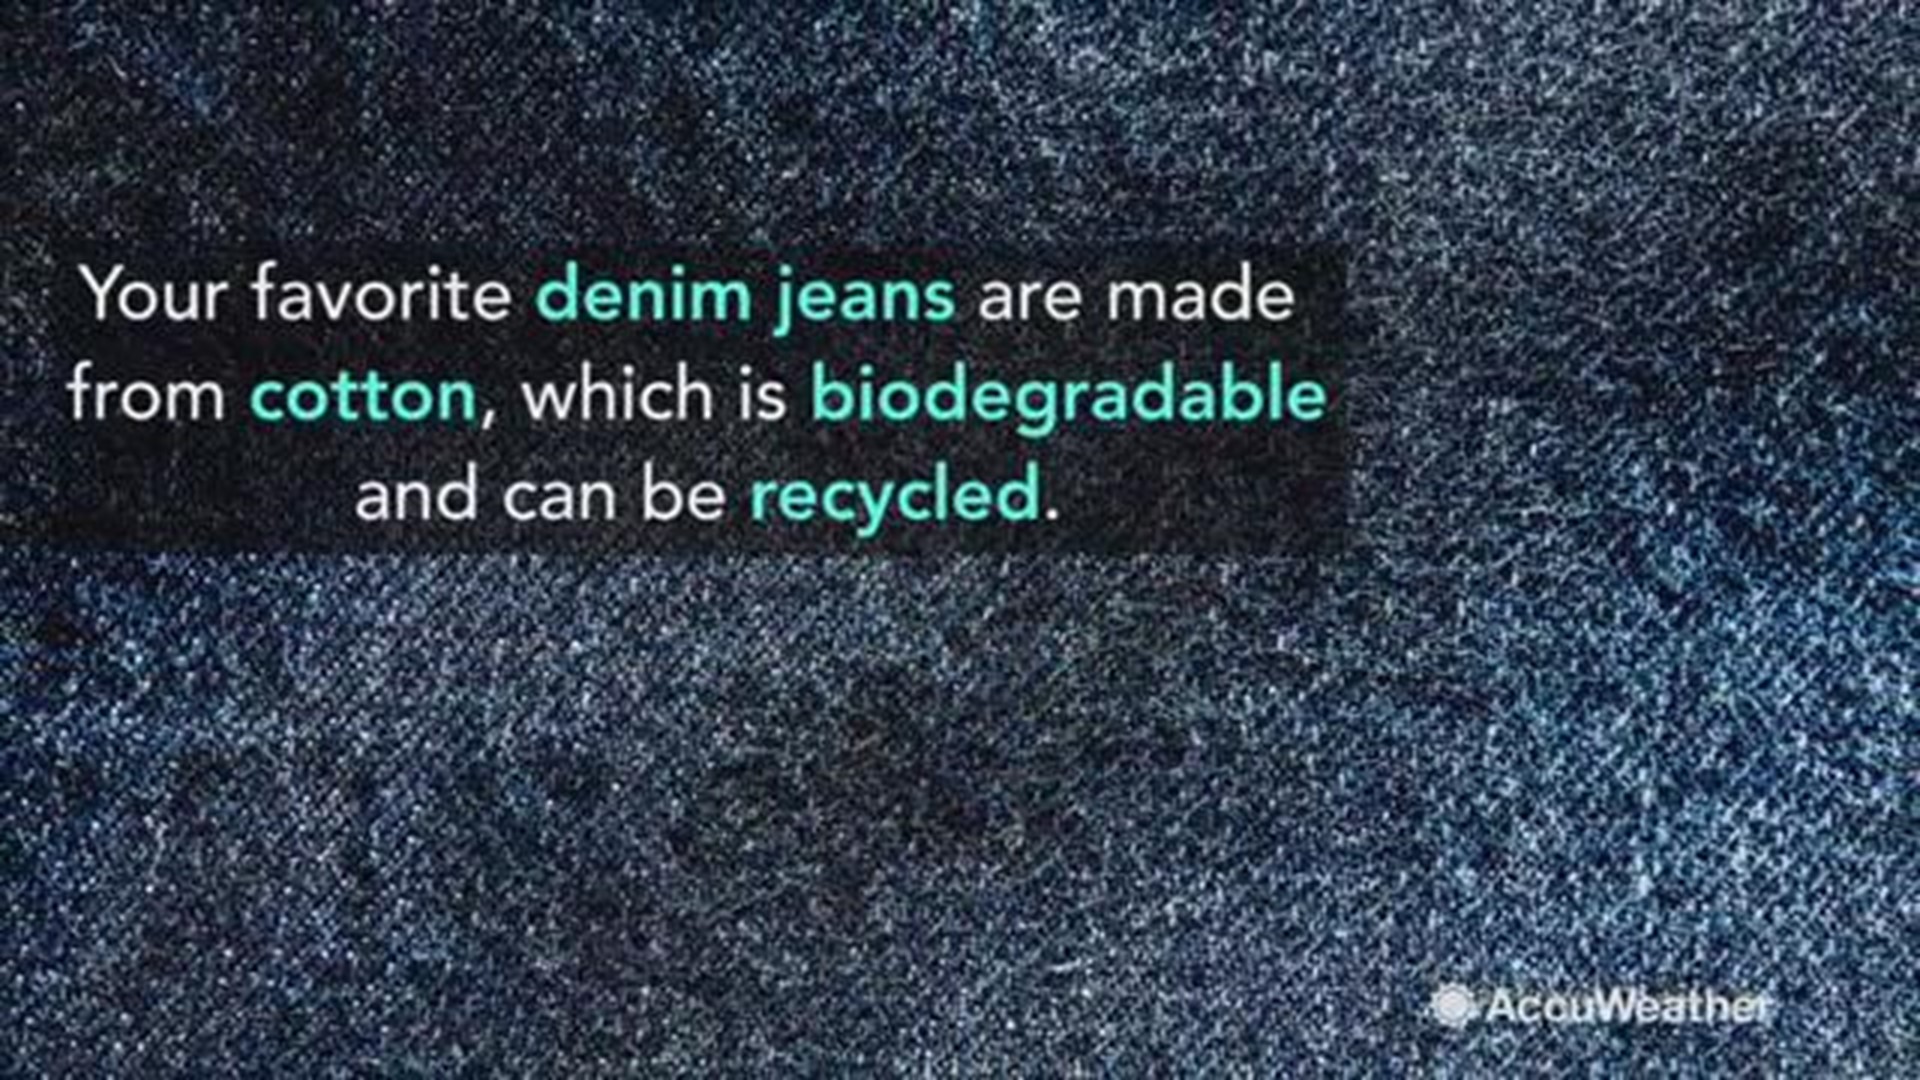 Recycling your unwanted denim is easy. Cotton Incorporated's Blue Jeans Go Green program takes your old jeans and converts them into housing insulation.